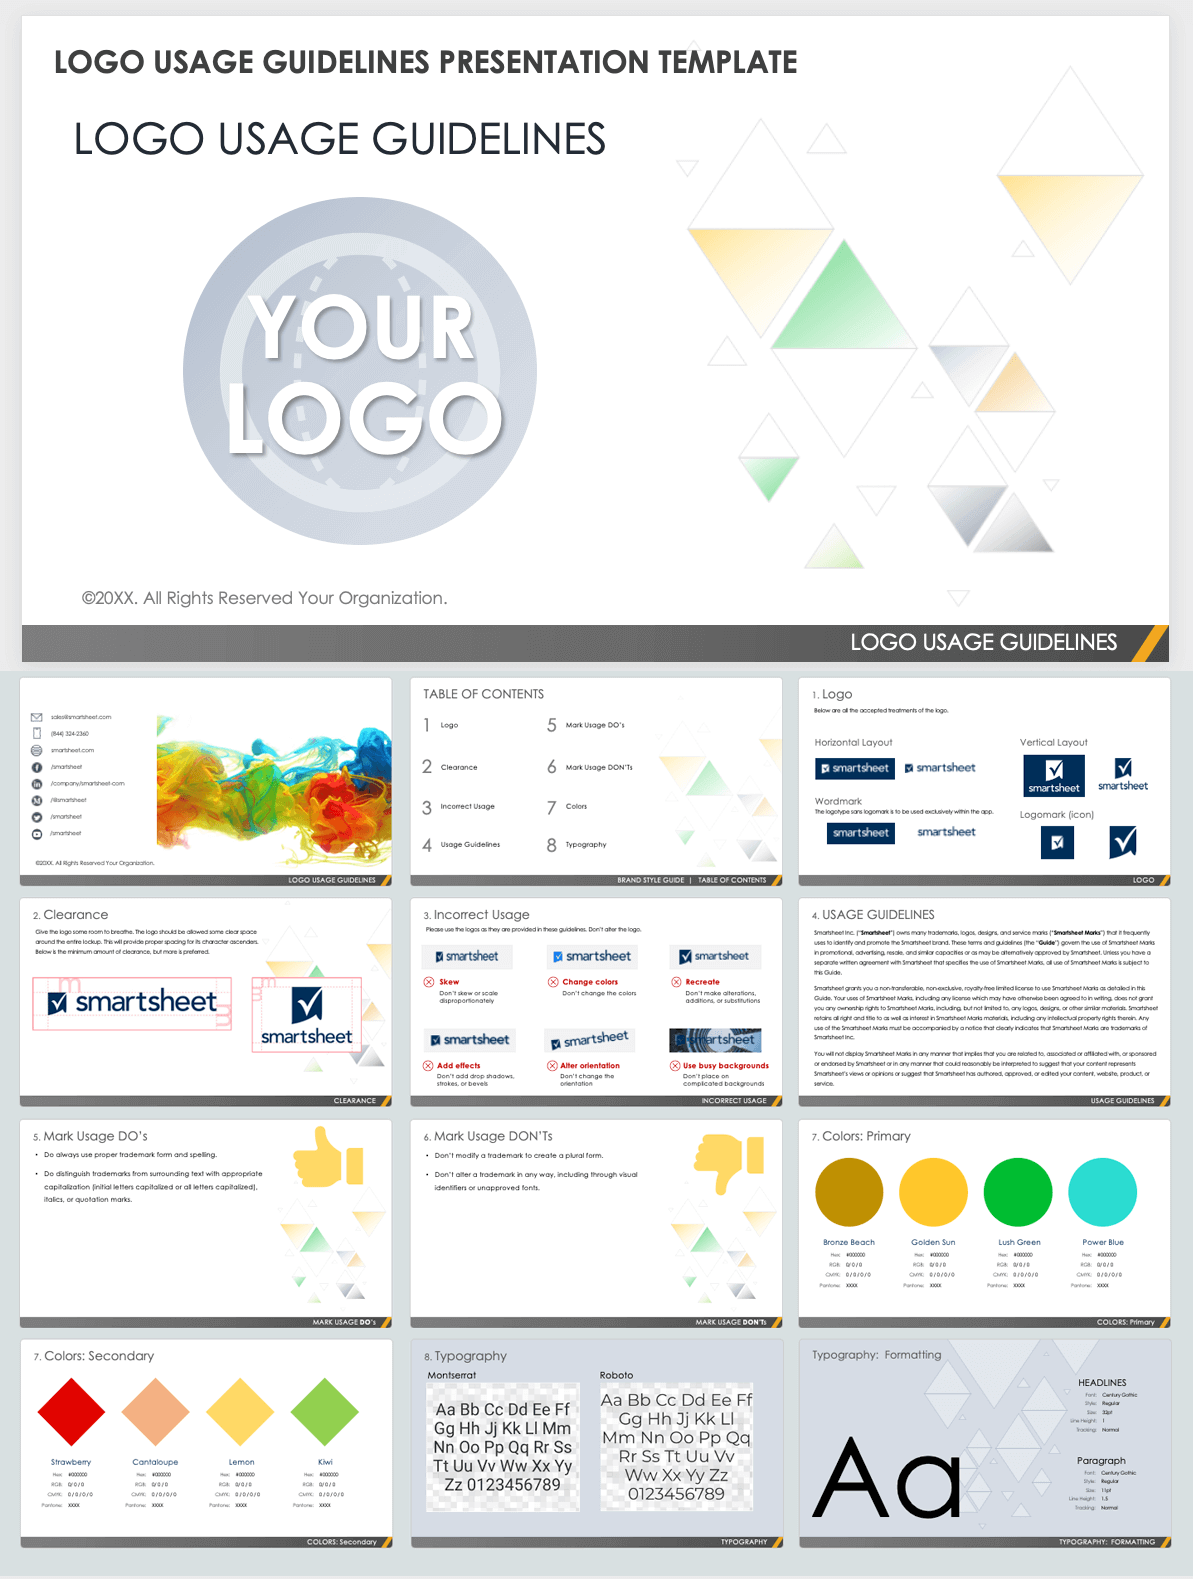 Logo Usage Guidelines Presentation Template Powerpoint